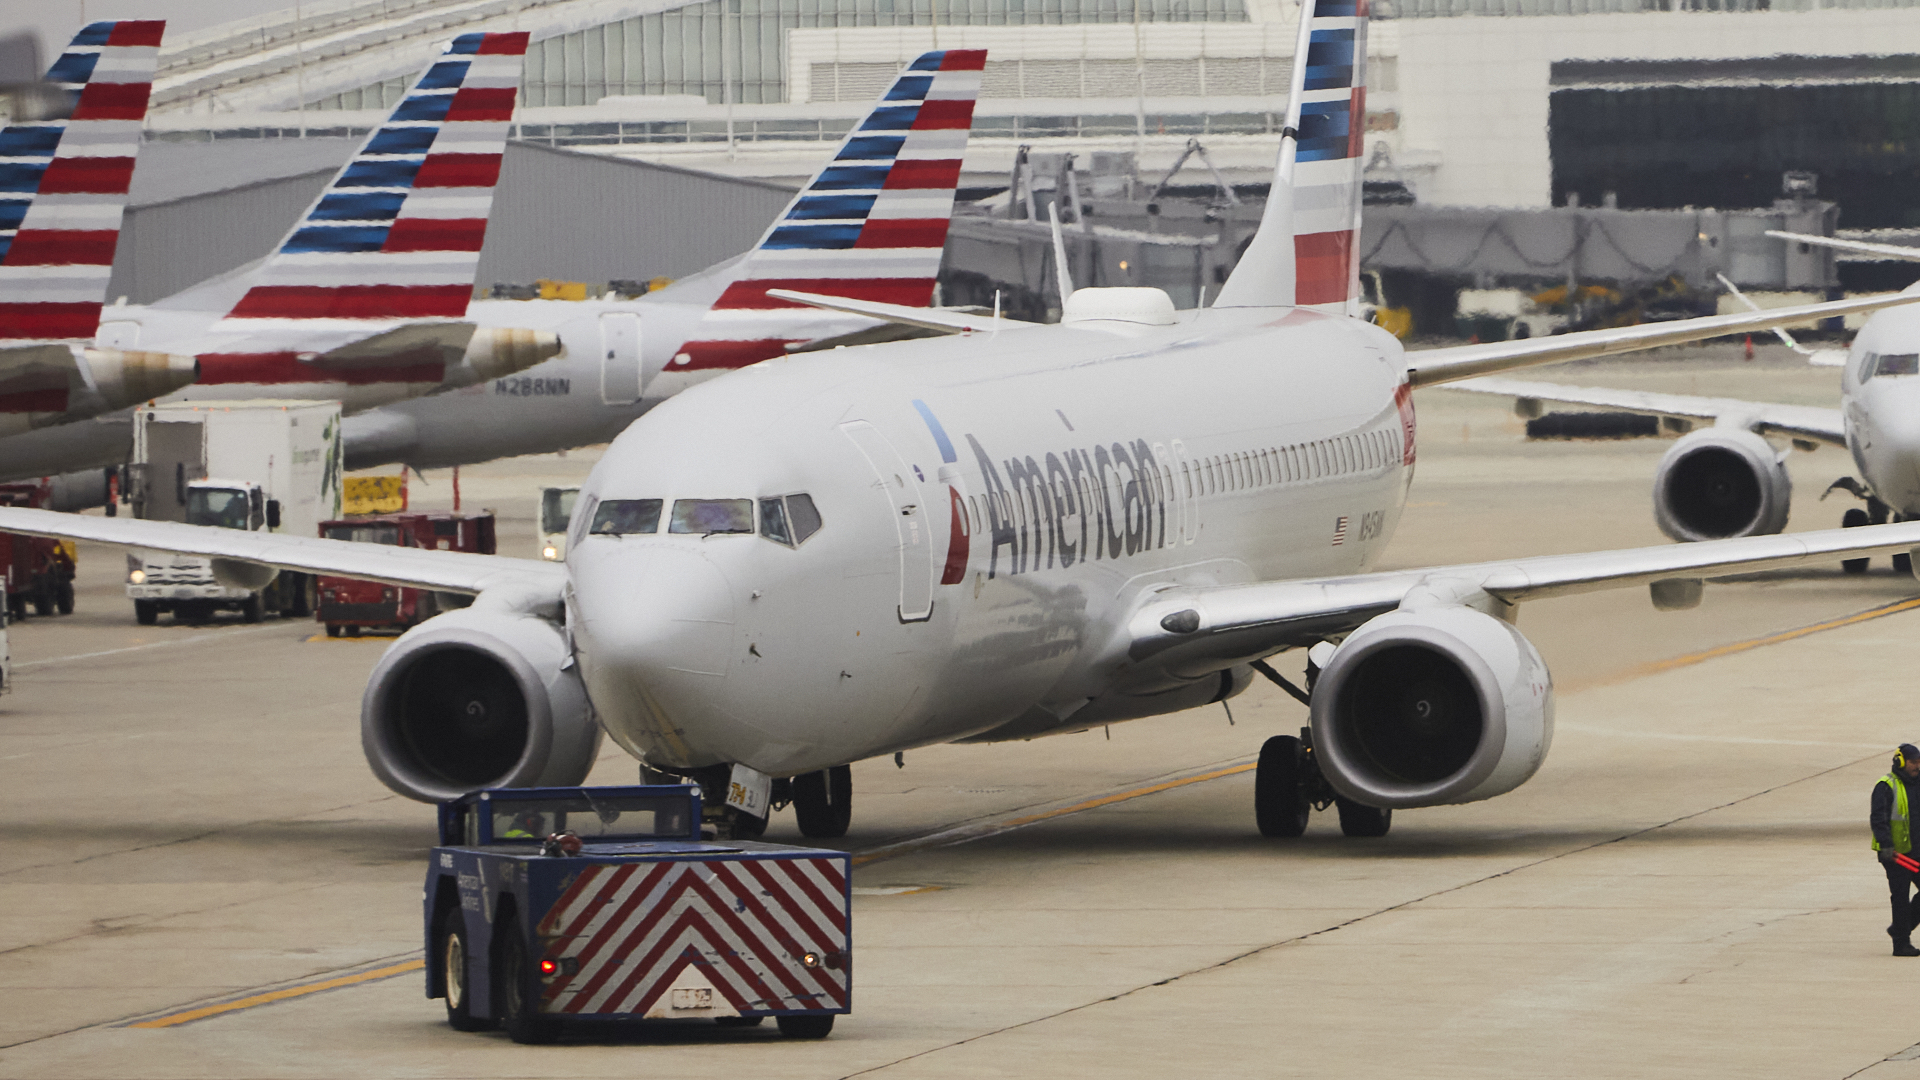 American Airlines jets on the tarmac